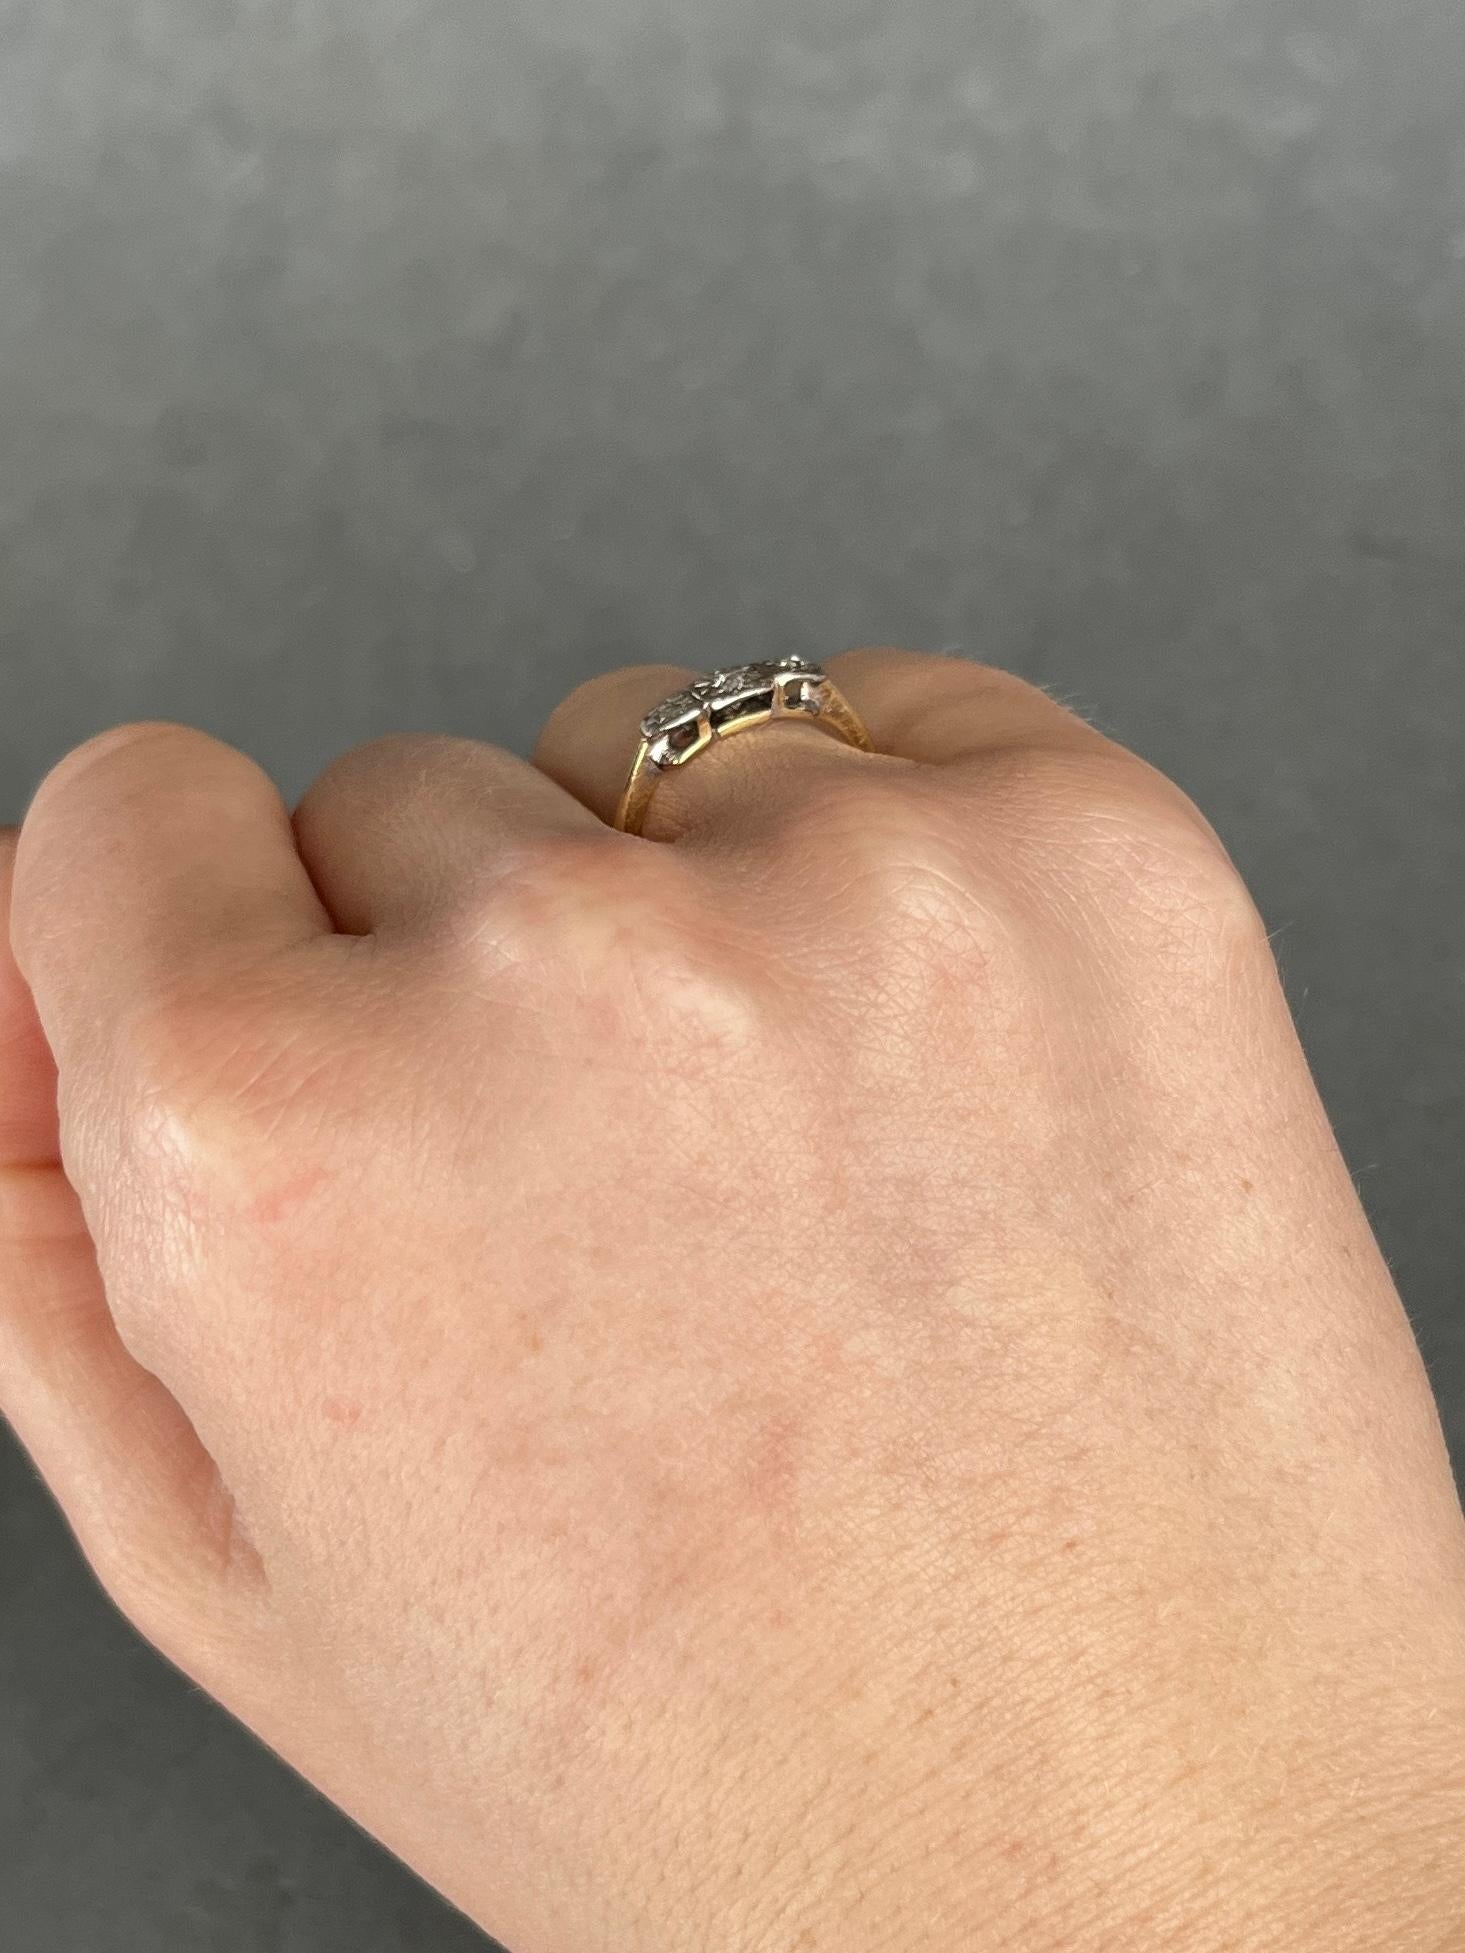 Three diamonds sit fabulously on top of a simple setting modelled in 18ct gold and stones set in platinum. The central round diamond measures 7pts and the rose cut diamonds either side measure 4pts each.  

Ring Size: L or 5 3/4 
Height Off finger: